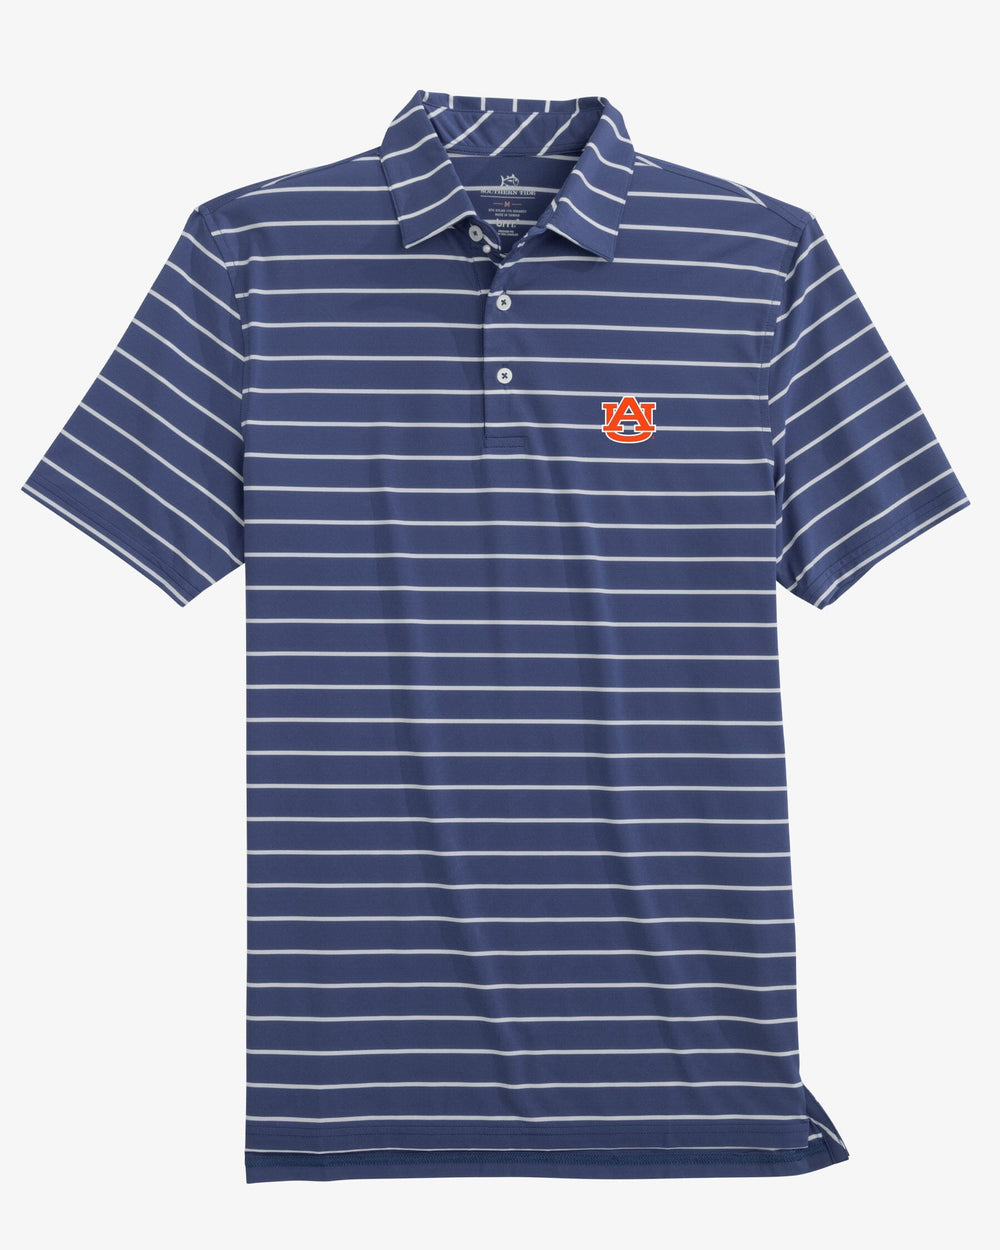 The front view of the Auburn Tigers Brreeze Desmond Stripe Performance Polo by Southern Tide - Navy